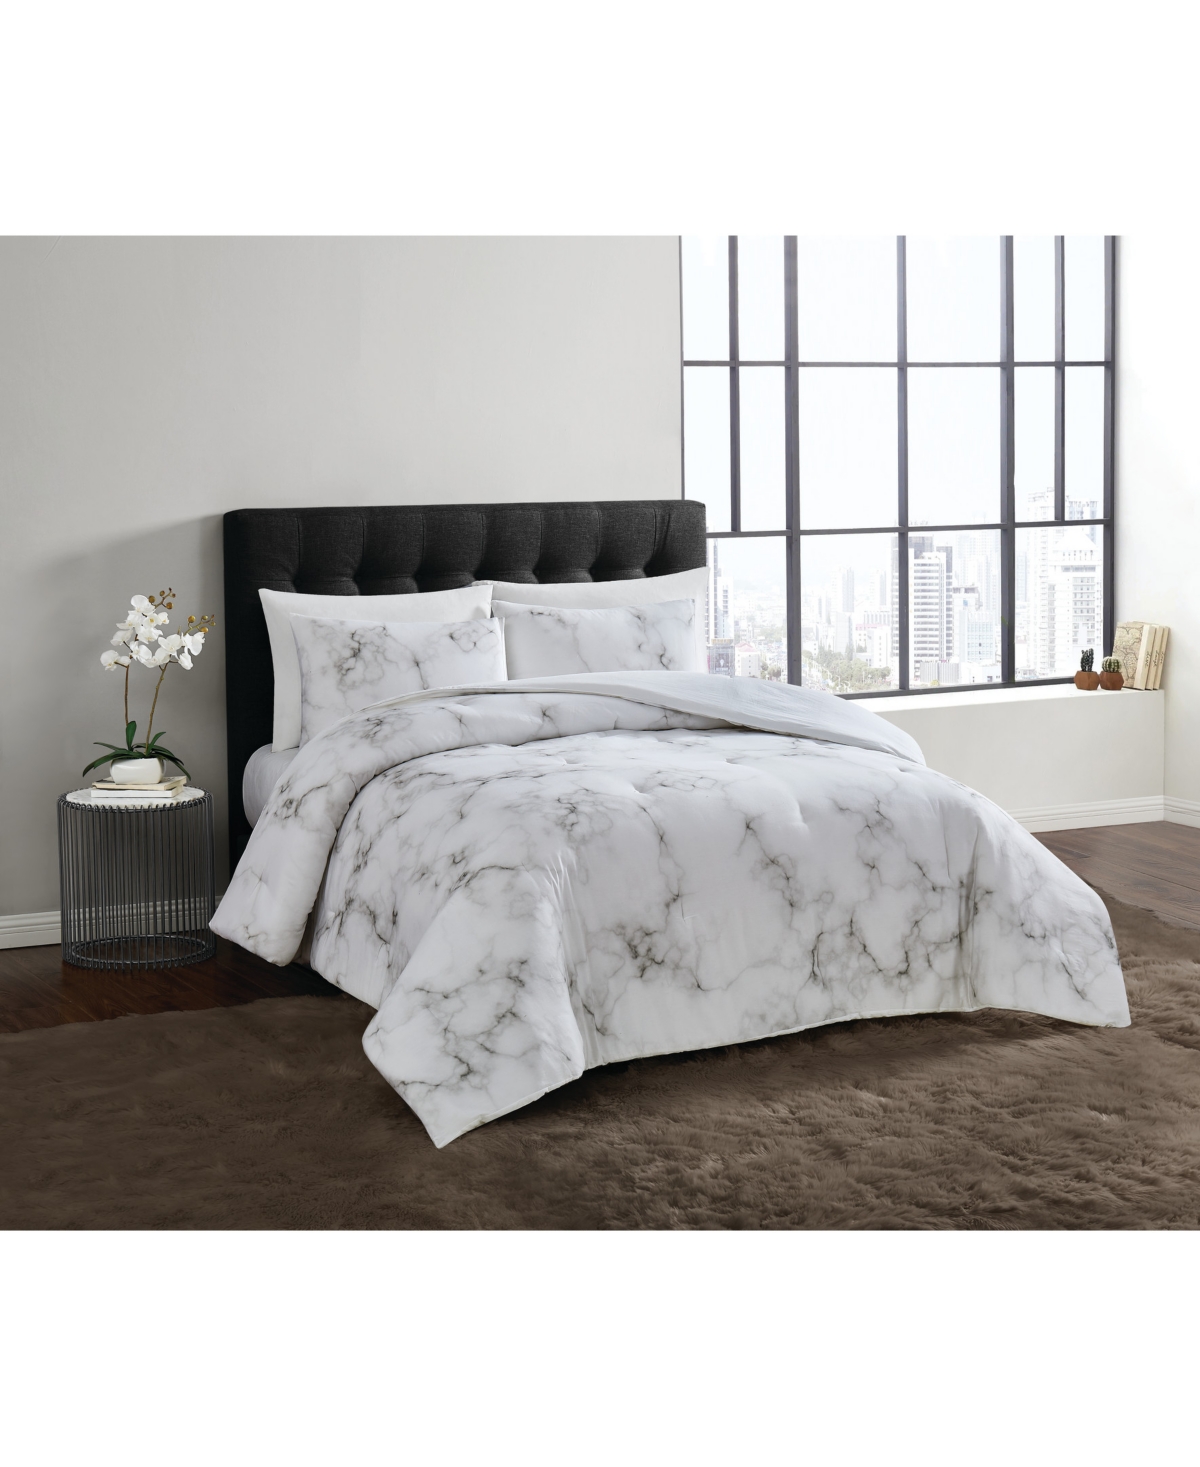 UPC 783048107459 product image for Vince Camuto Amalfi Full/Queen Comforter Set Bedding | upcitemdb.com